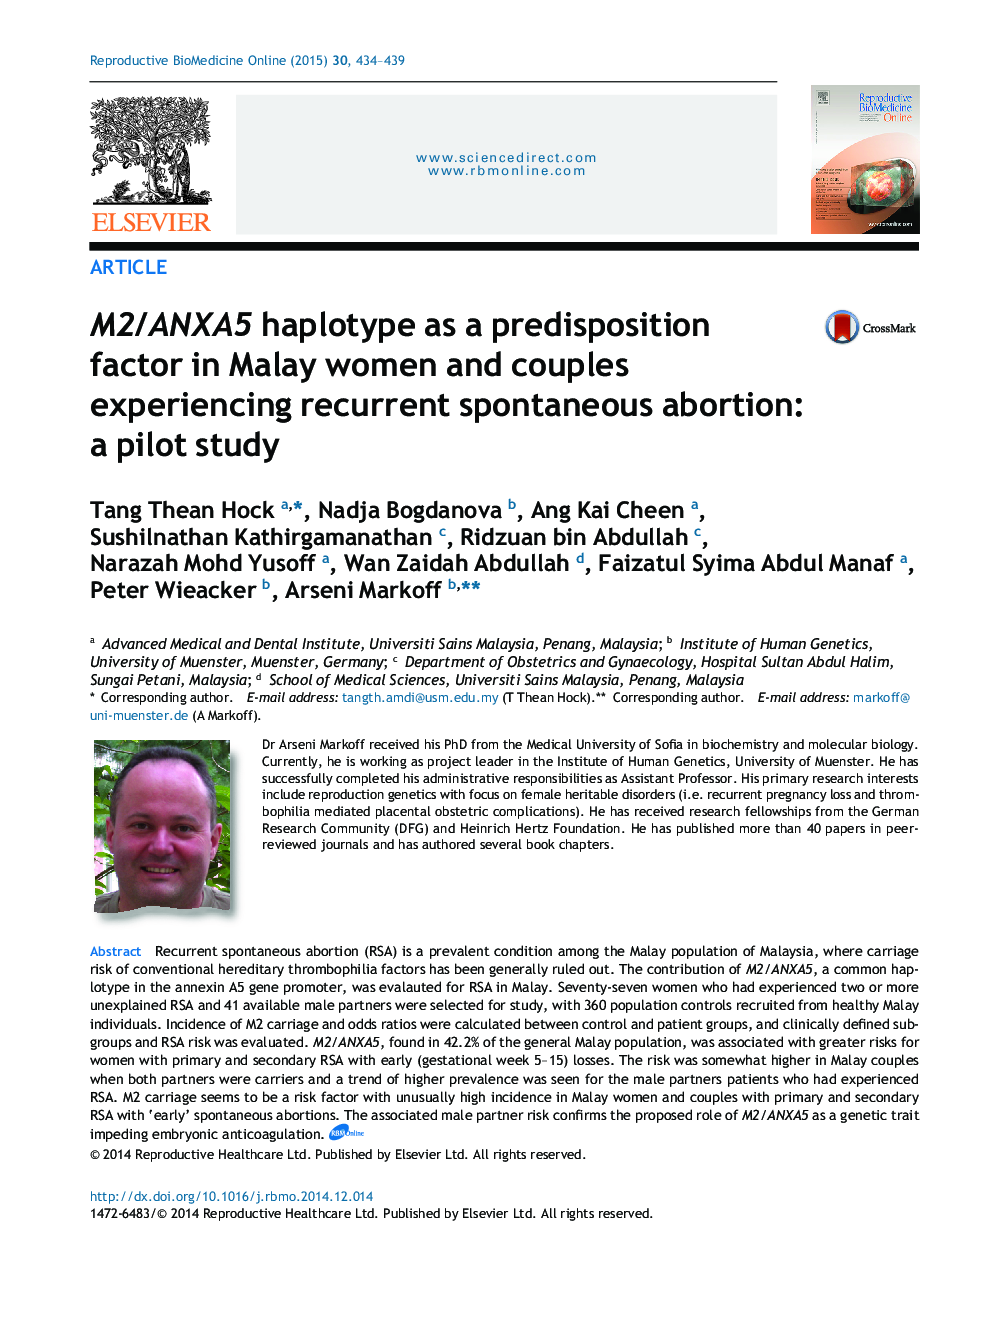 M2/ANXA5 haplotype as a predisposition factor in Malay women and couples experiencing recurrent spontaneous abortion: a pilot study